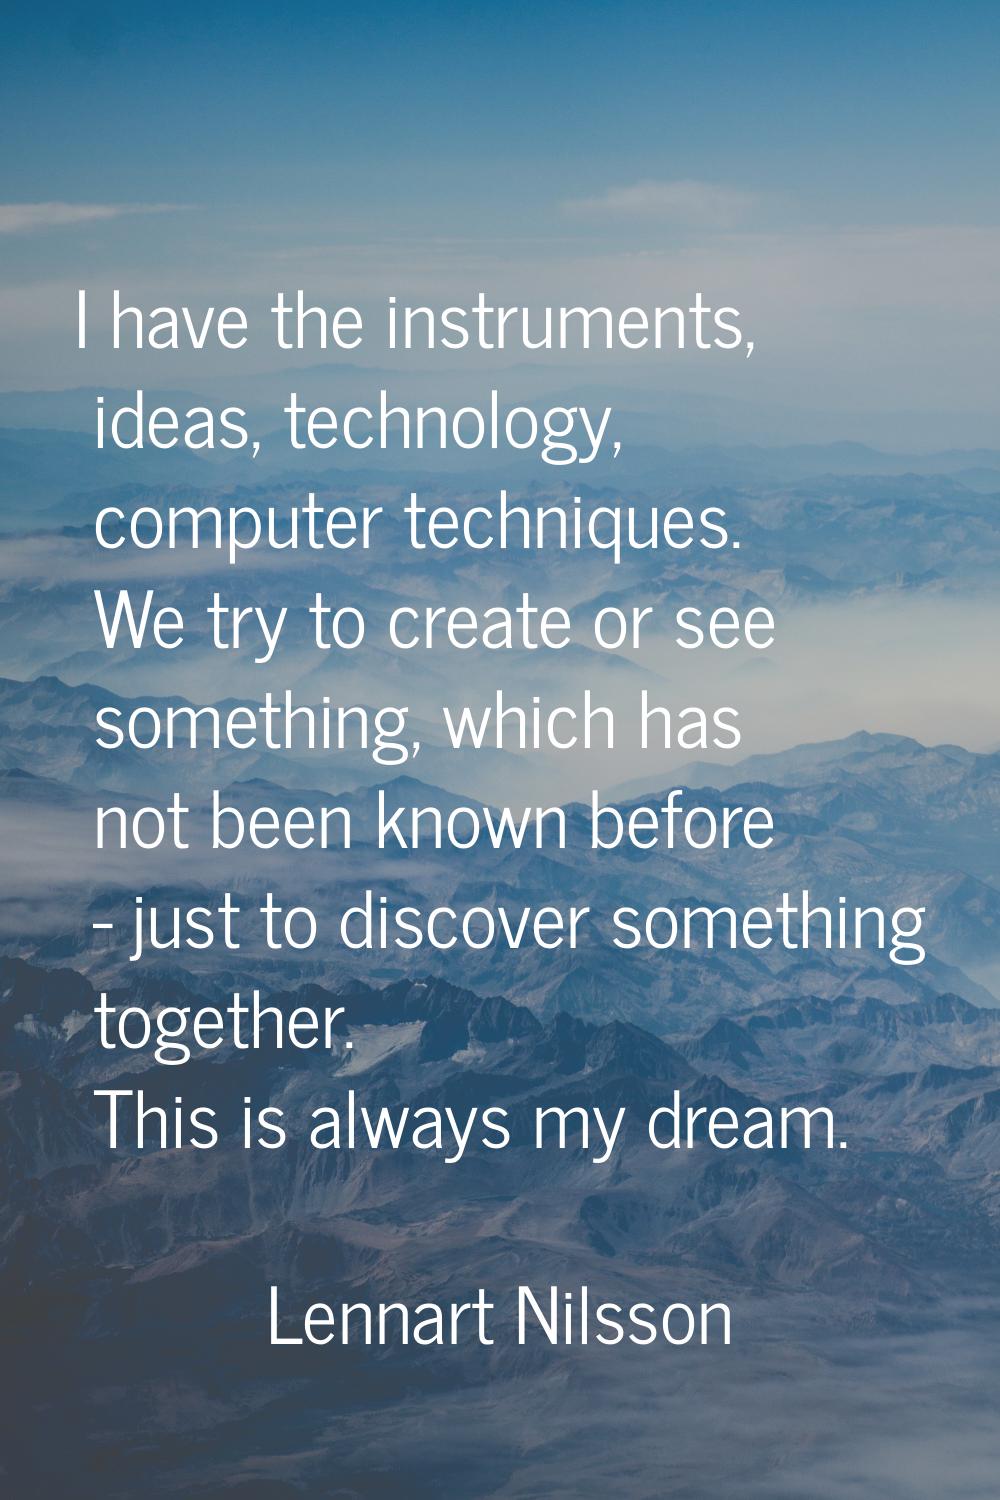 I have the instruments, ideas, technology, computer techniques. We try to create or see something, 